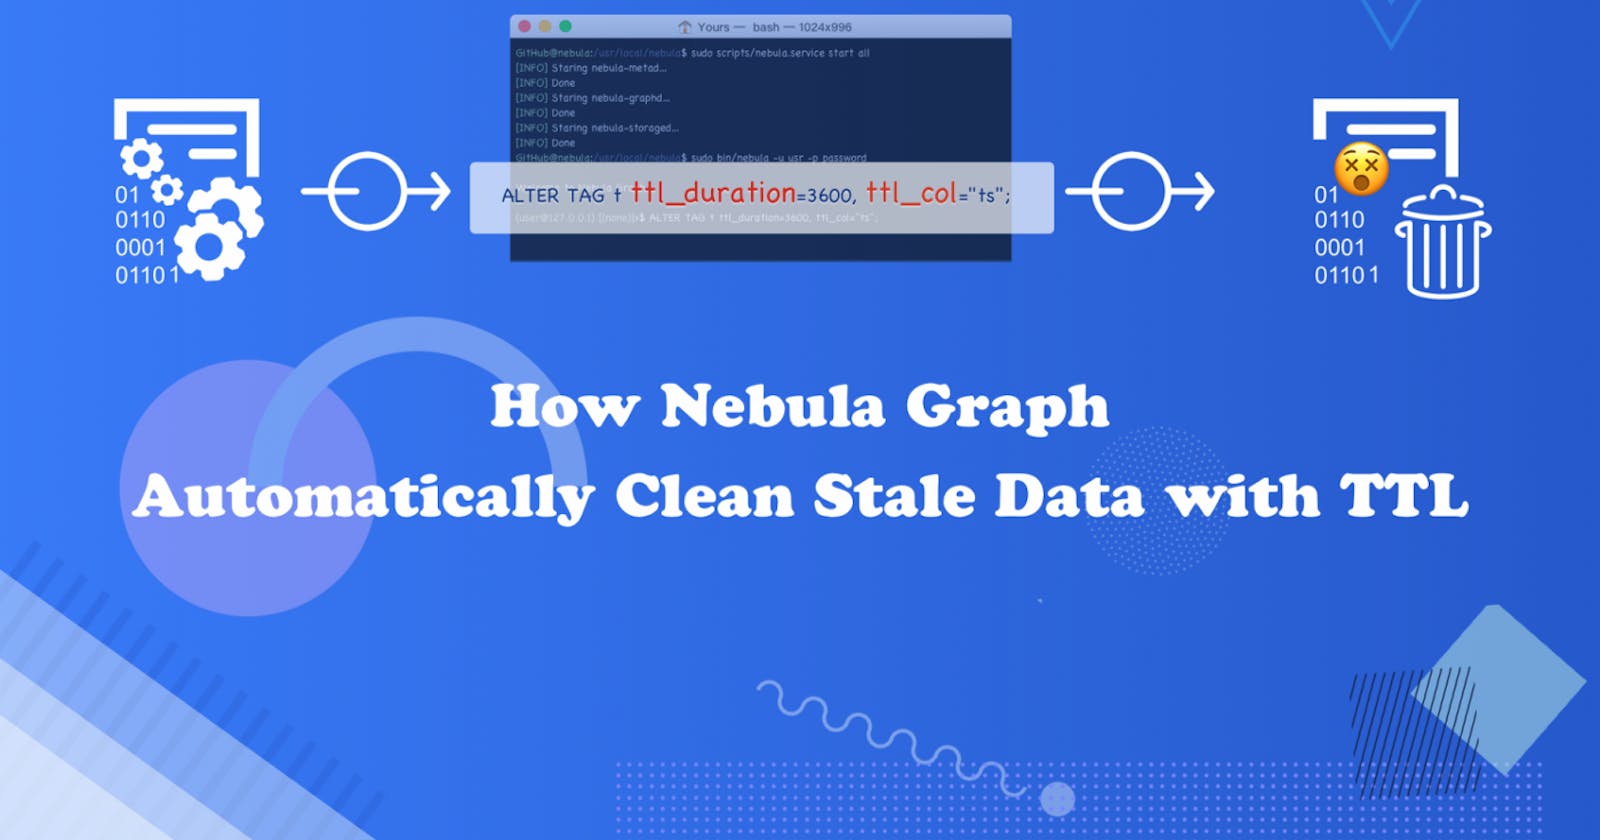 How Nebula Graph Automatically Cleans Stale Data with TTL